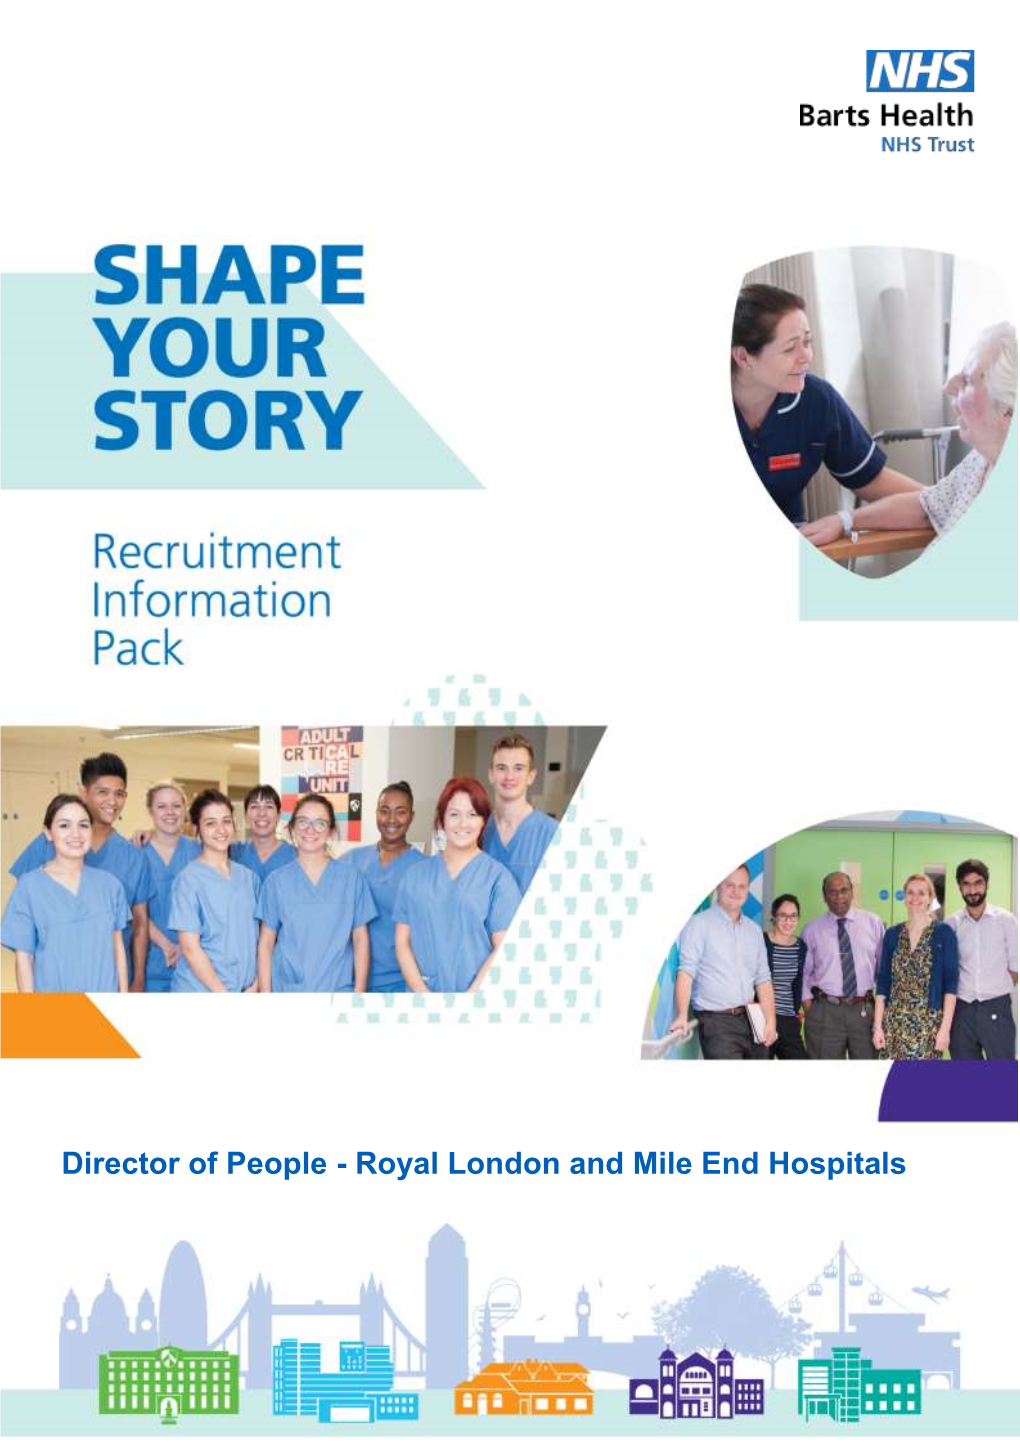 Director of People - Royal London and Mile End Hospitals